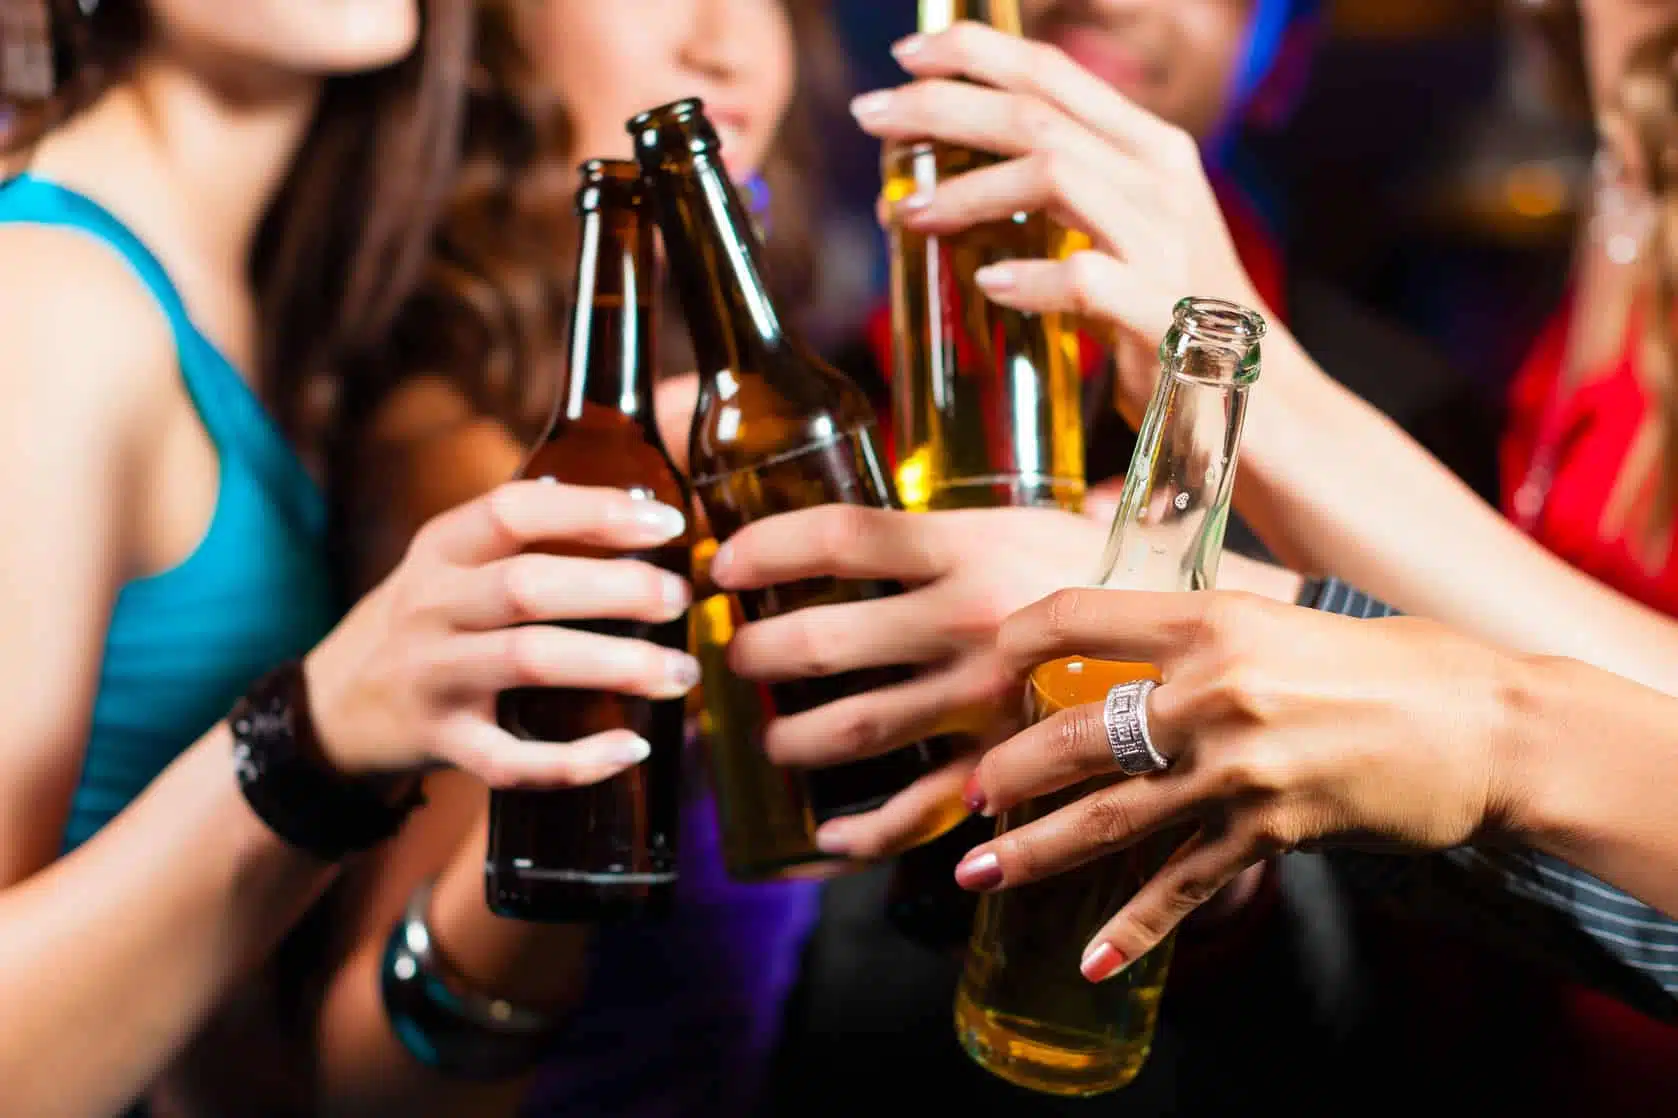 Alcohol Use Problems: 4 Steps to Moving in a Positive Direction Image